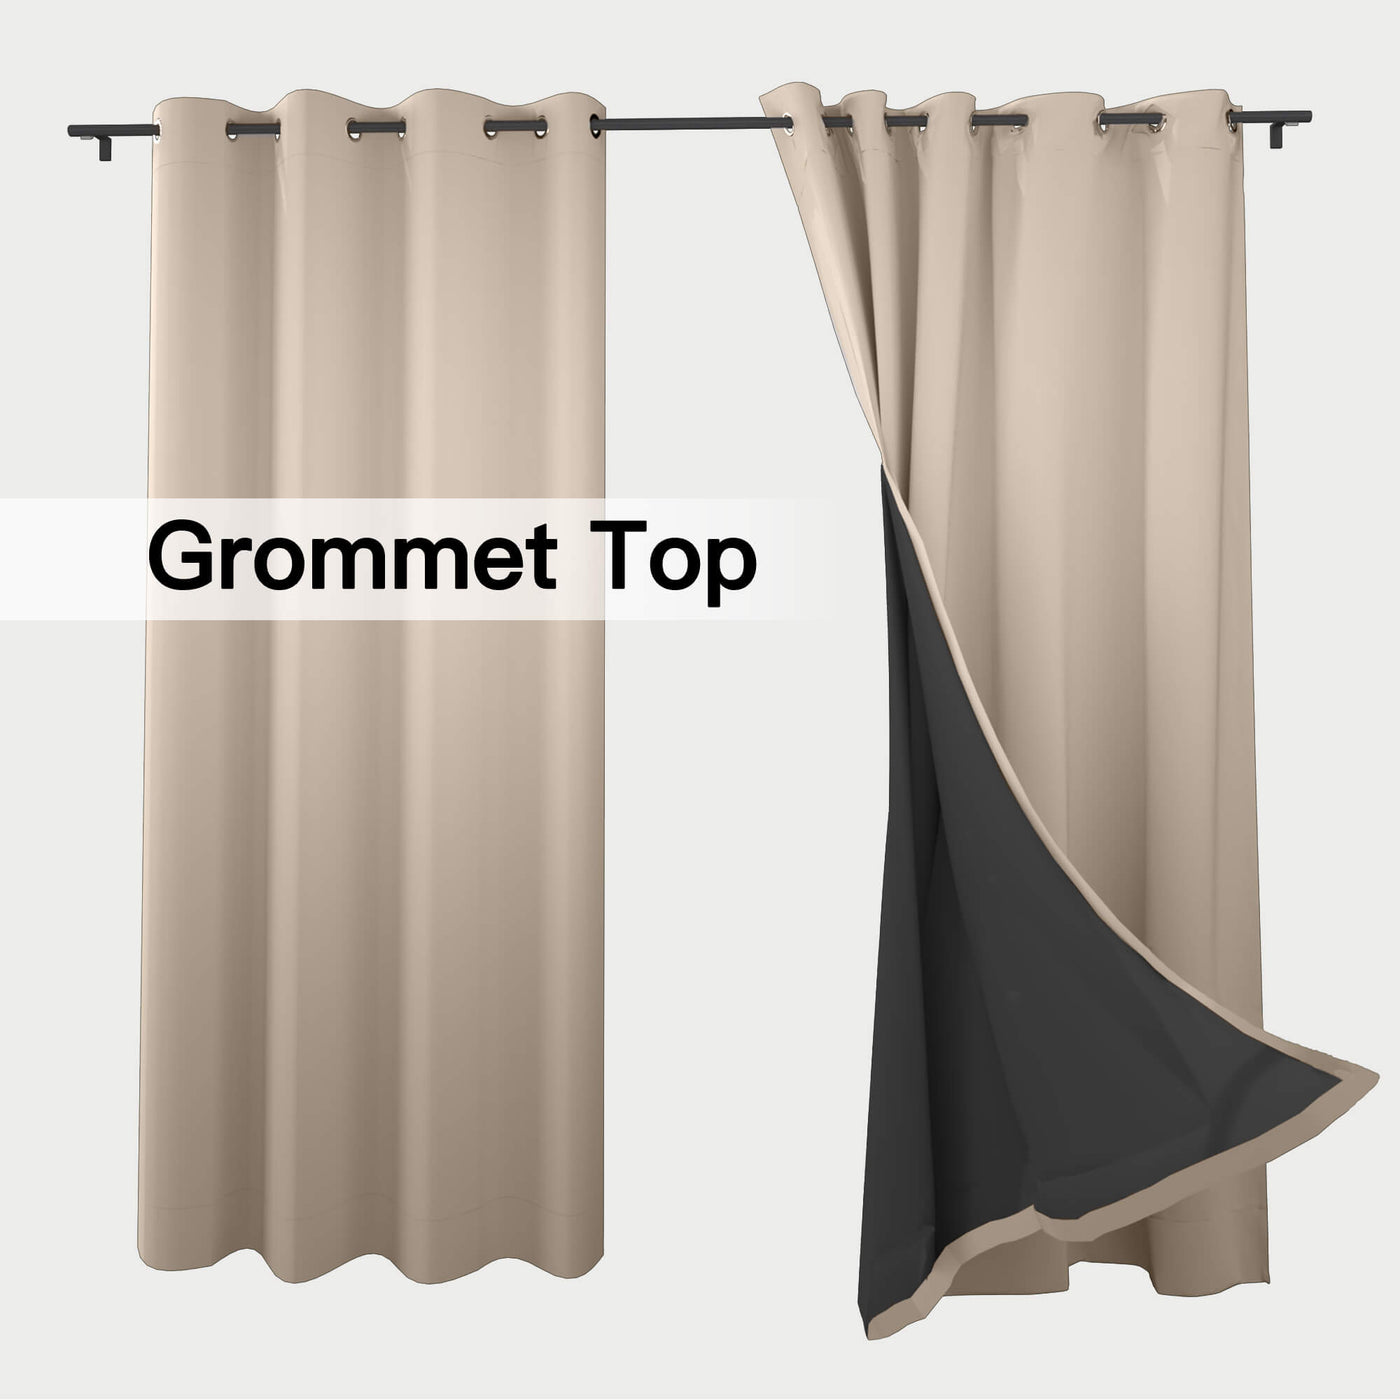 Heartcosy Thermal Curtains/Drapes 1 Panel Khaki | Waterproof Curtains Grommet/Tab Top | Custom Blackout Curtains